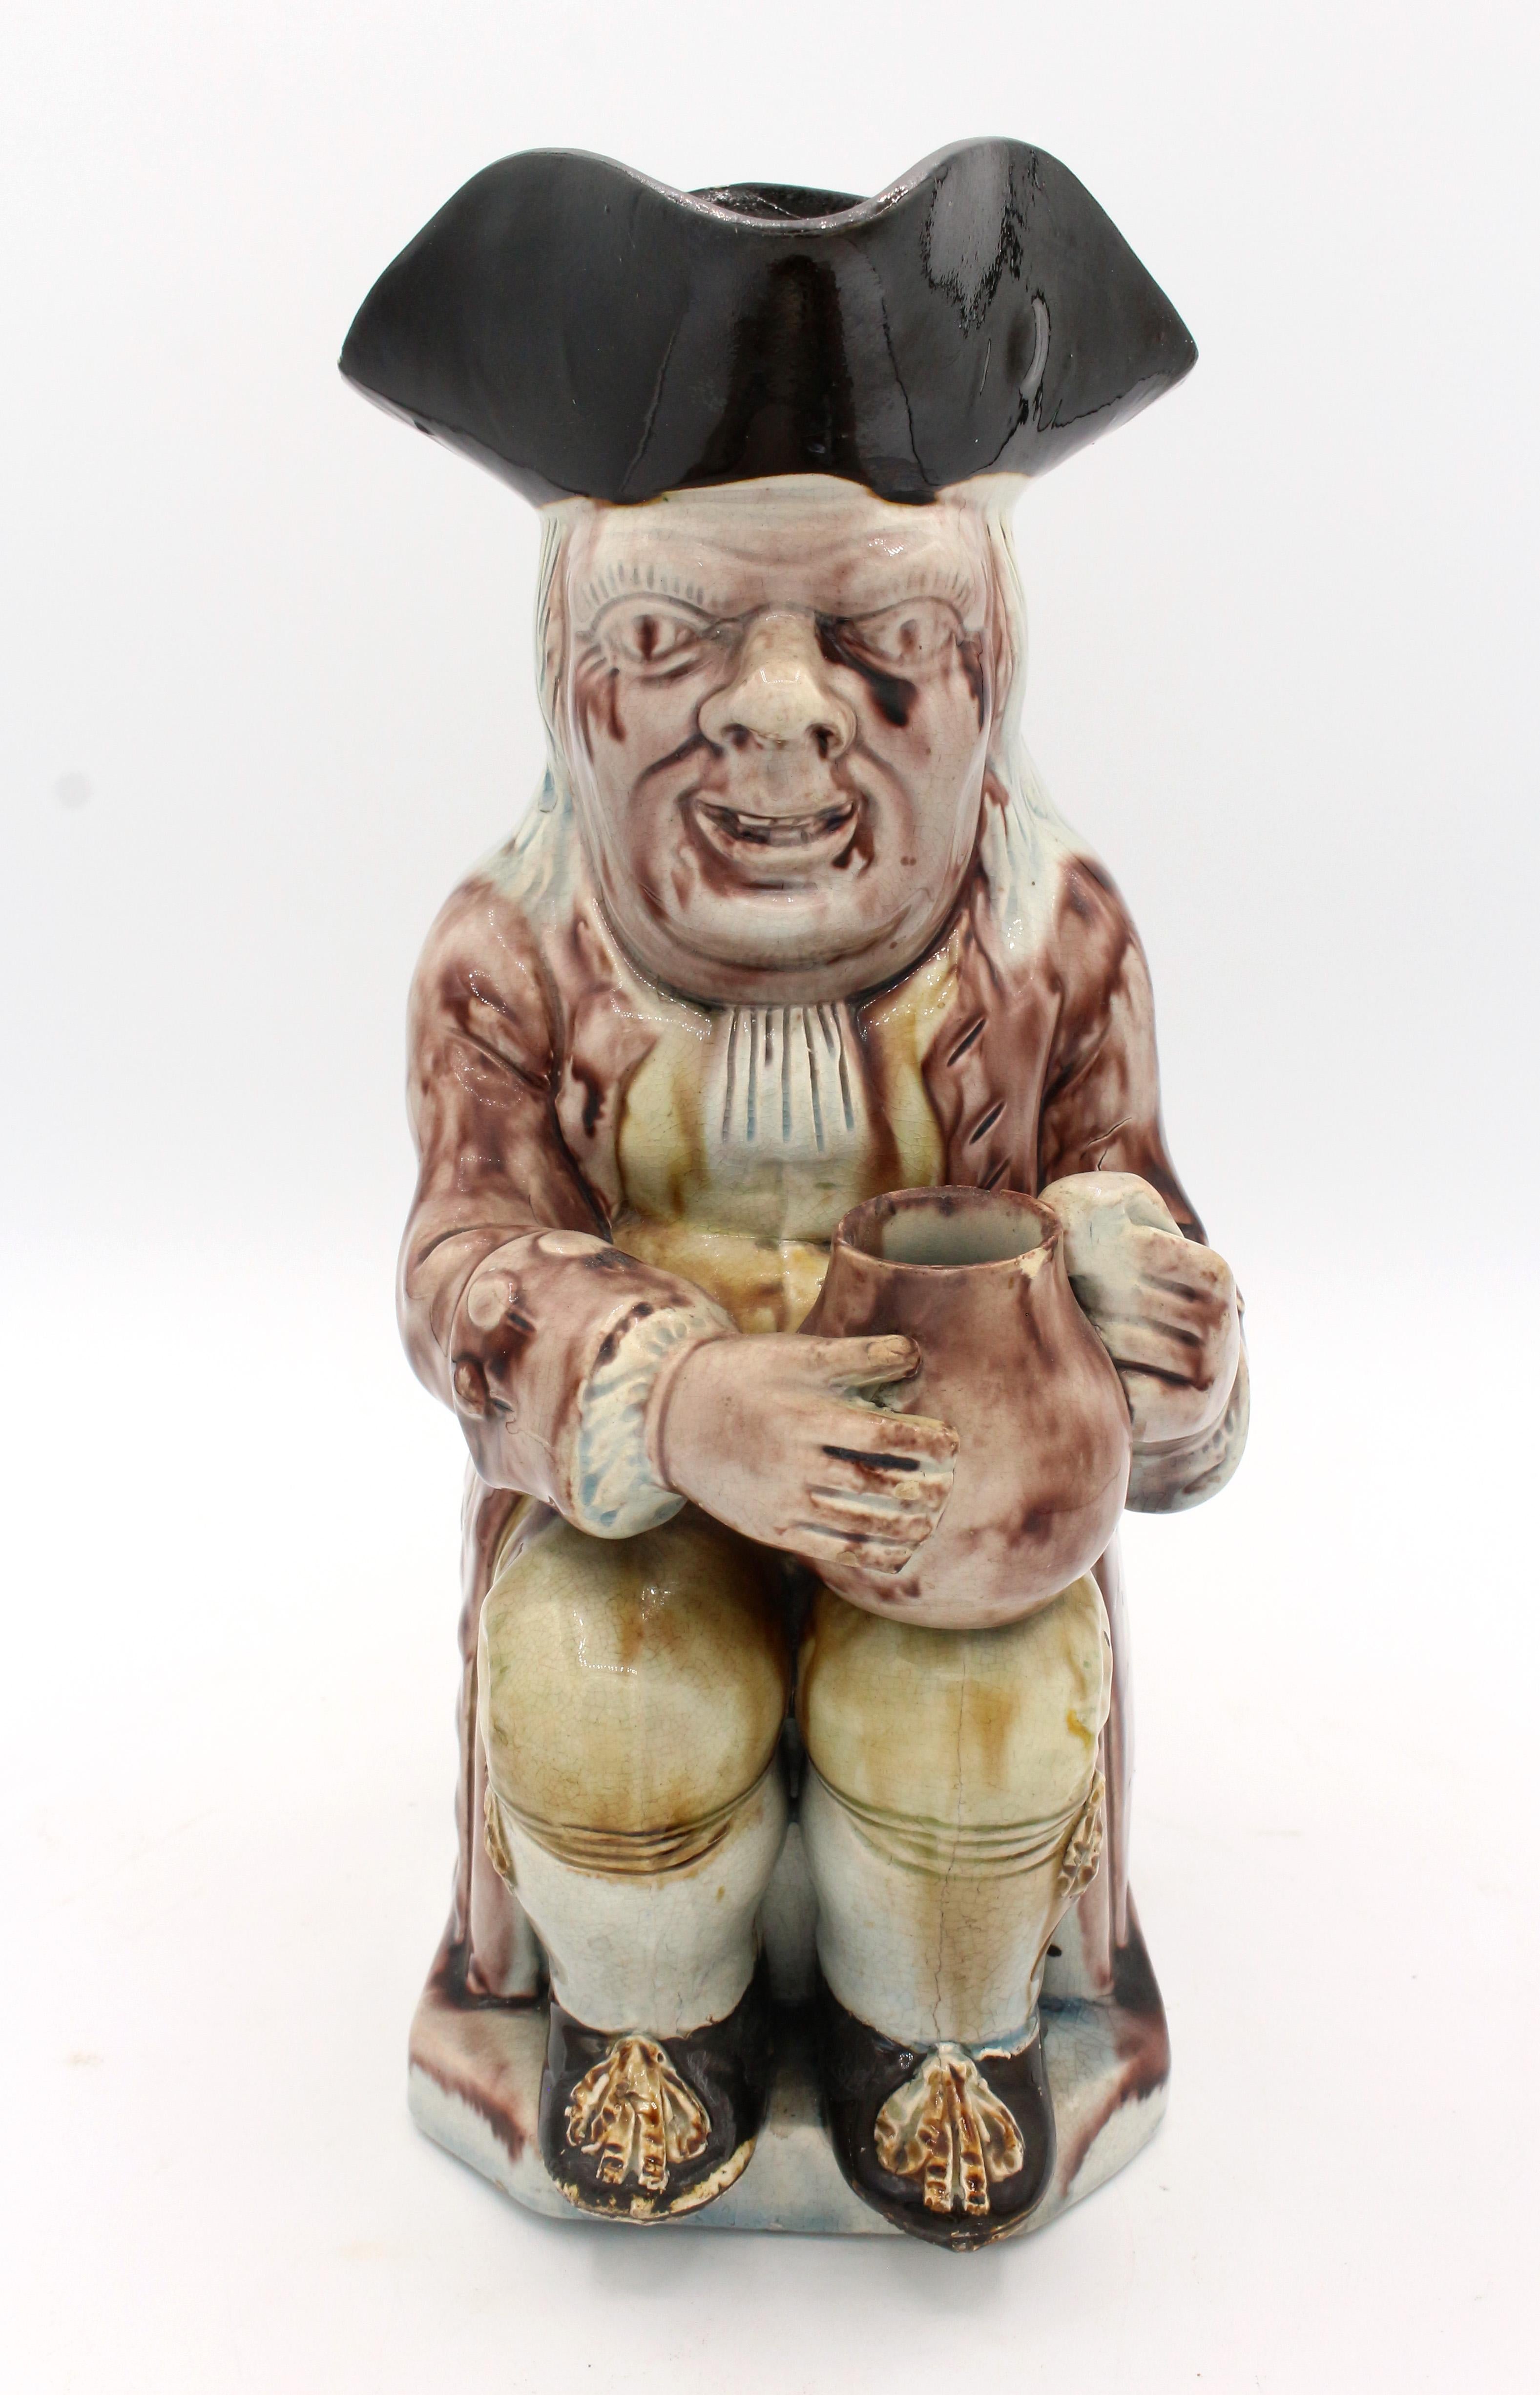 Circa 1860-80 Toby jug of a 'collier' with jug, English. Toby Philpot model, Whieldon type. Most interestingly, this is one of a small group of Toby jugs purporting to be circa 1790, none of the Toby scholars as yet have identified this producer of